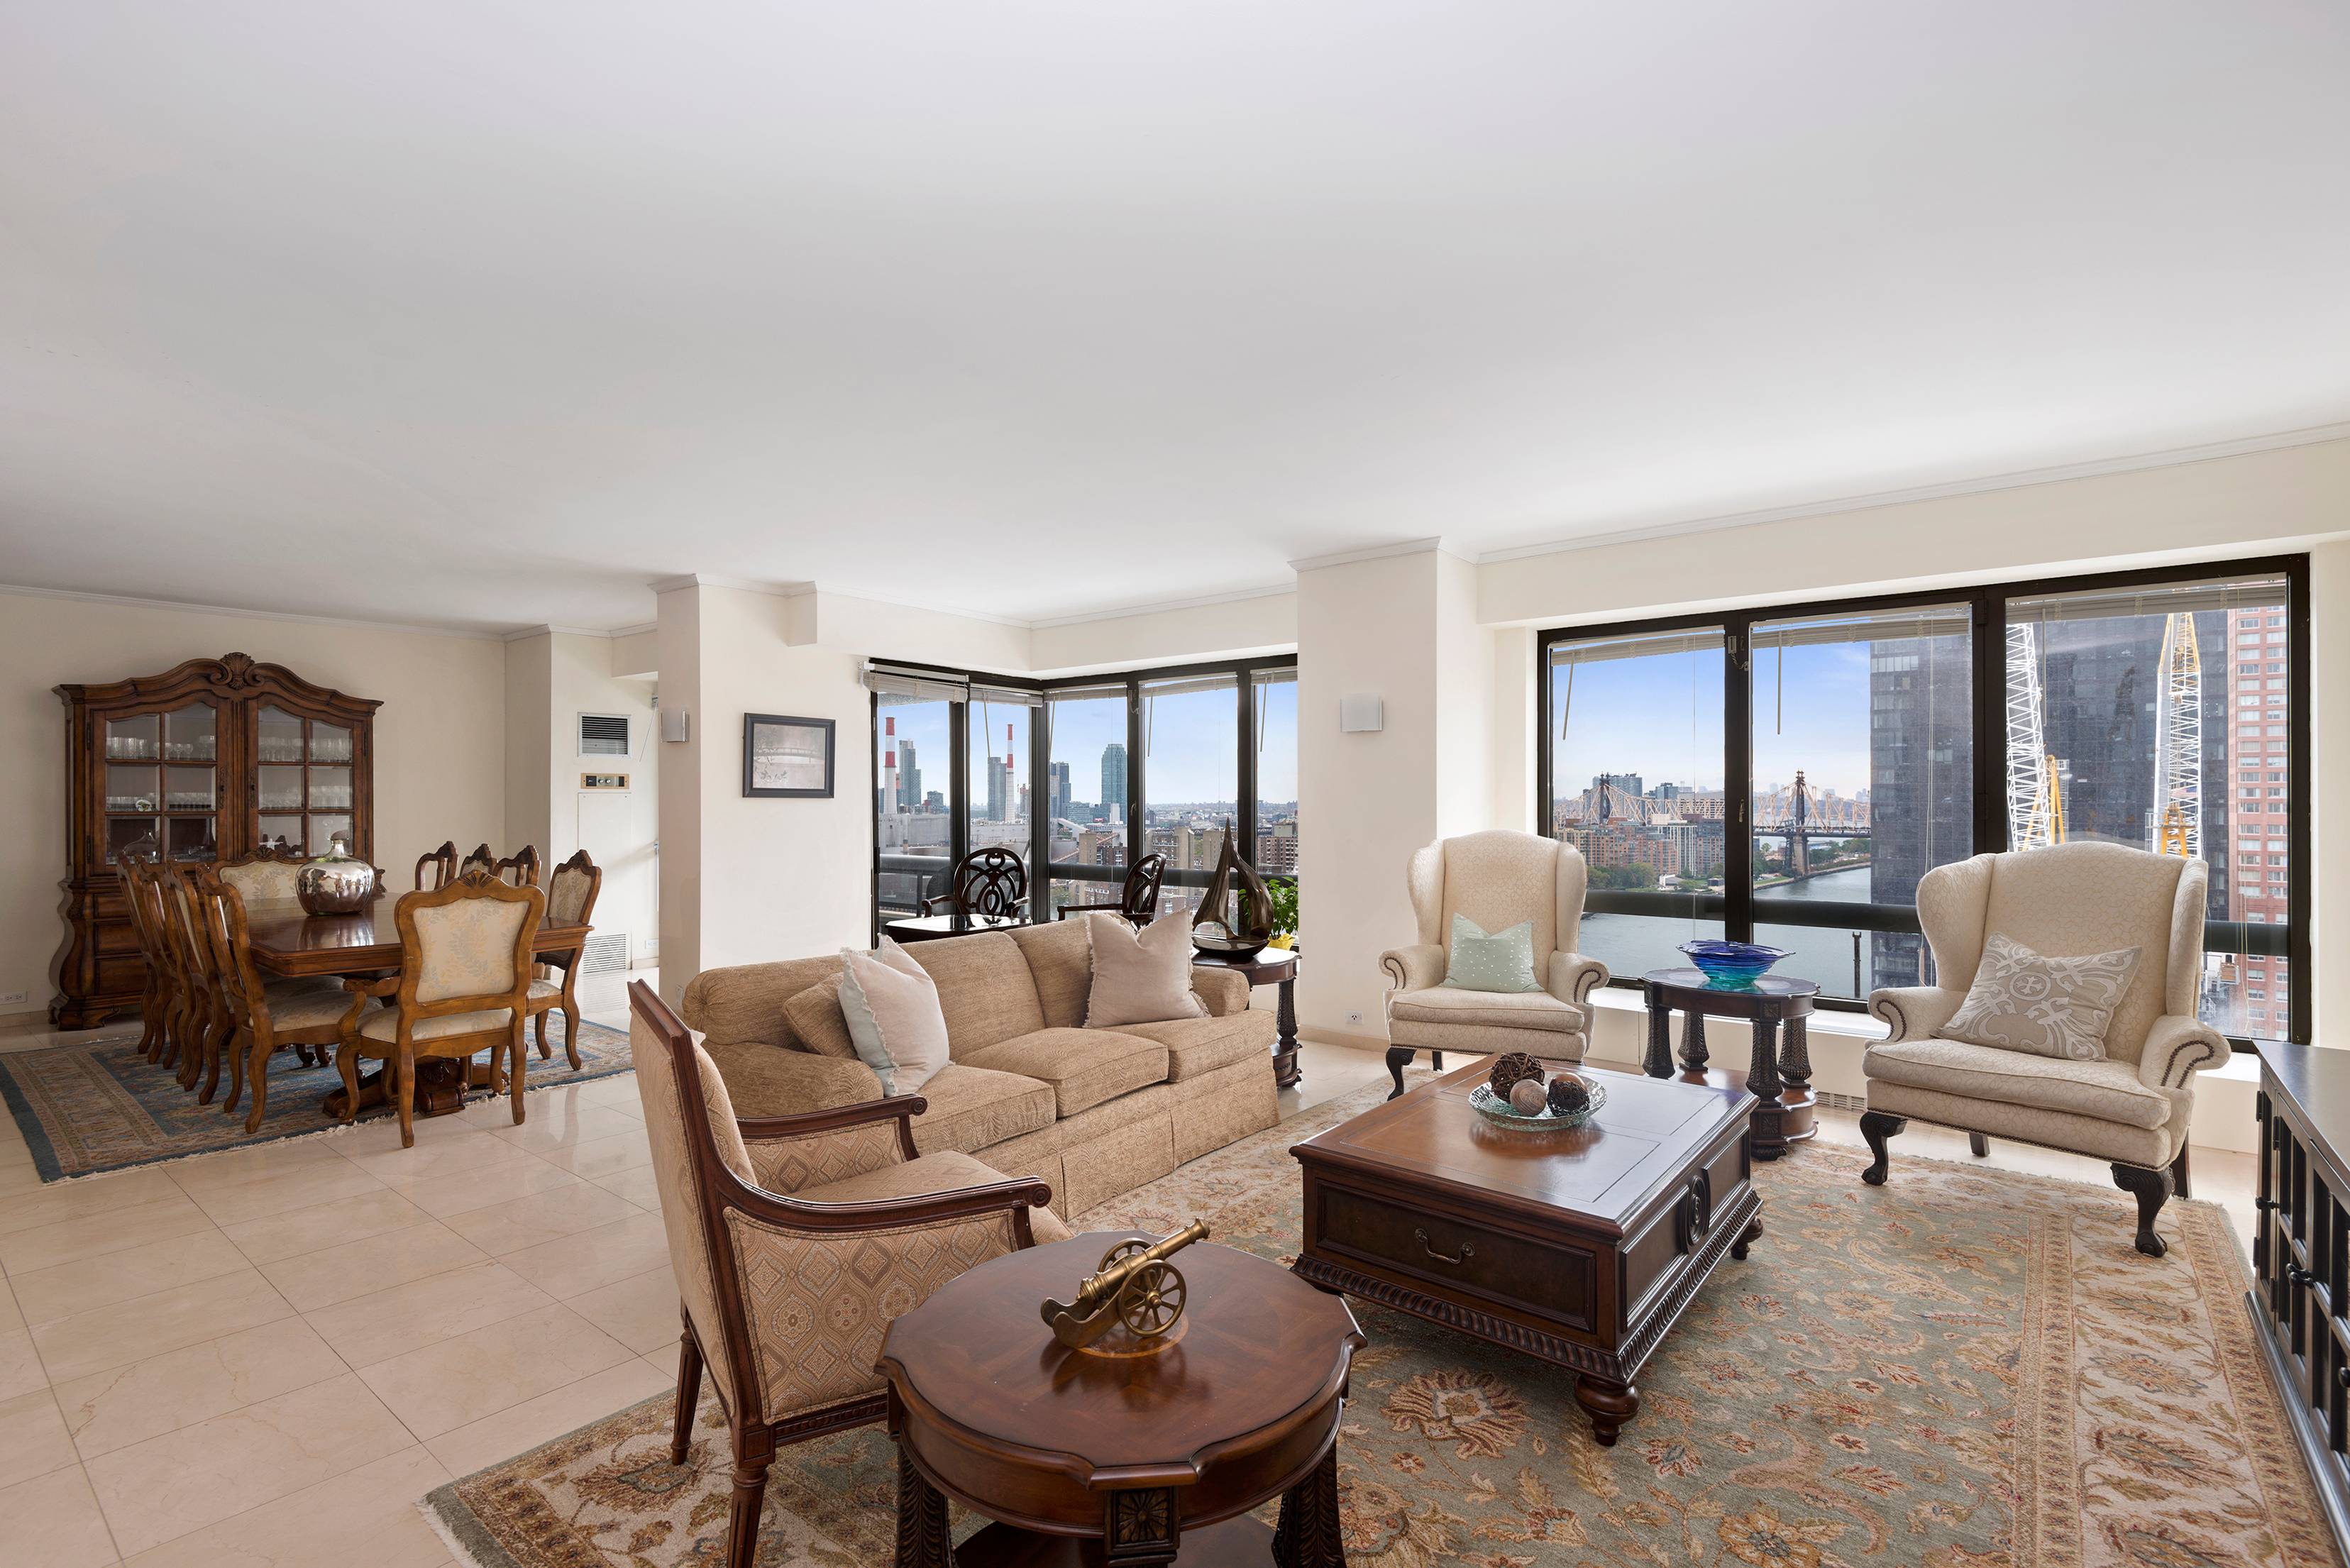 Expansive 2,924 Square Foot Four Bedroom Home in Upper East Side Luxury Condo High-Rise!